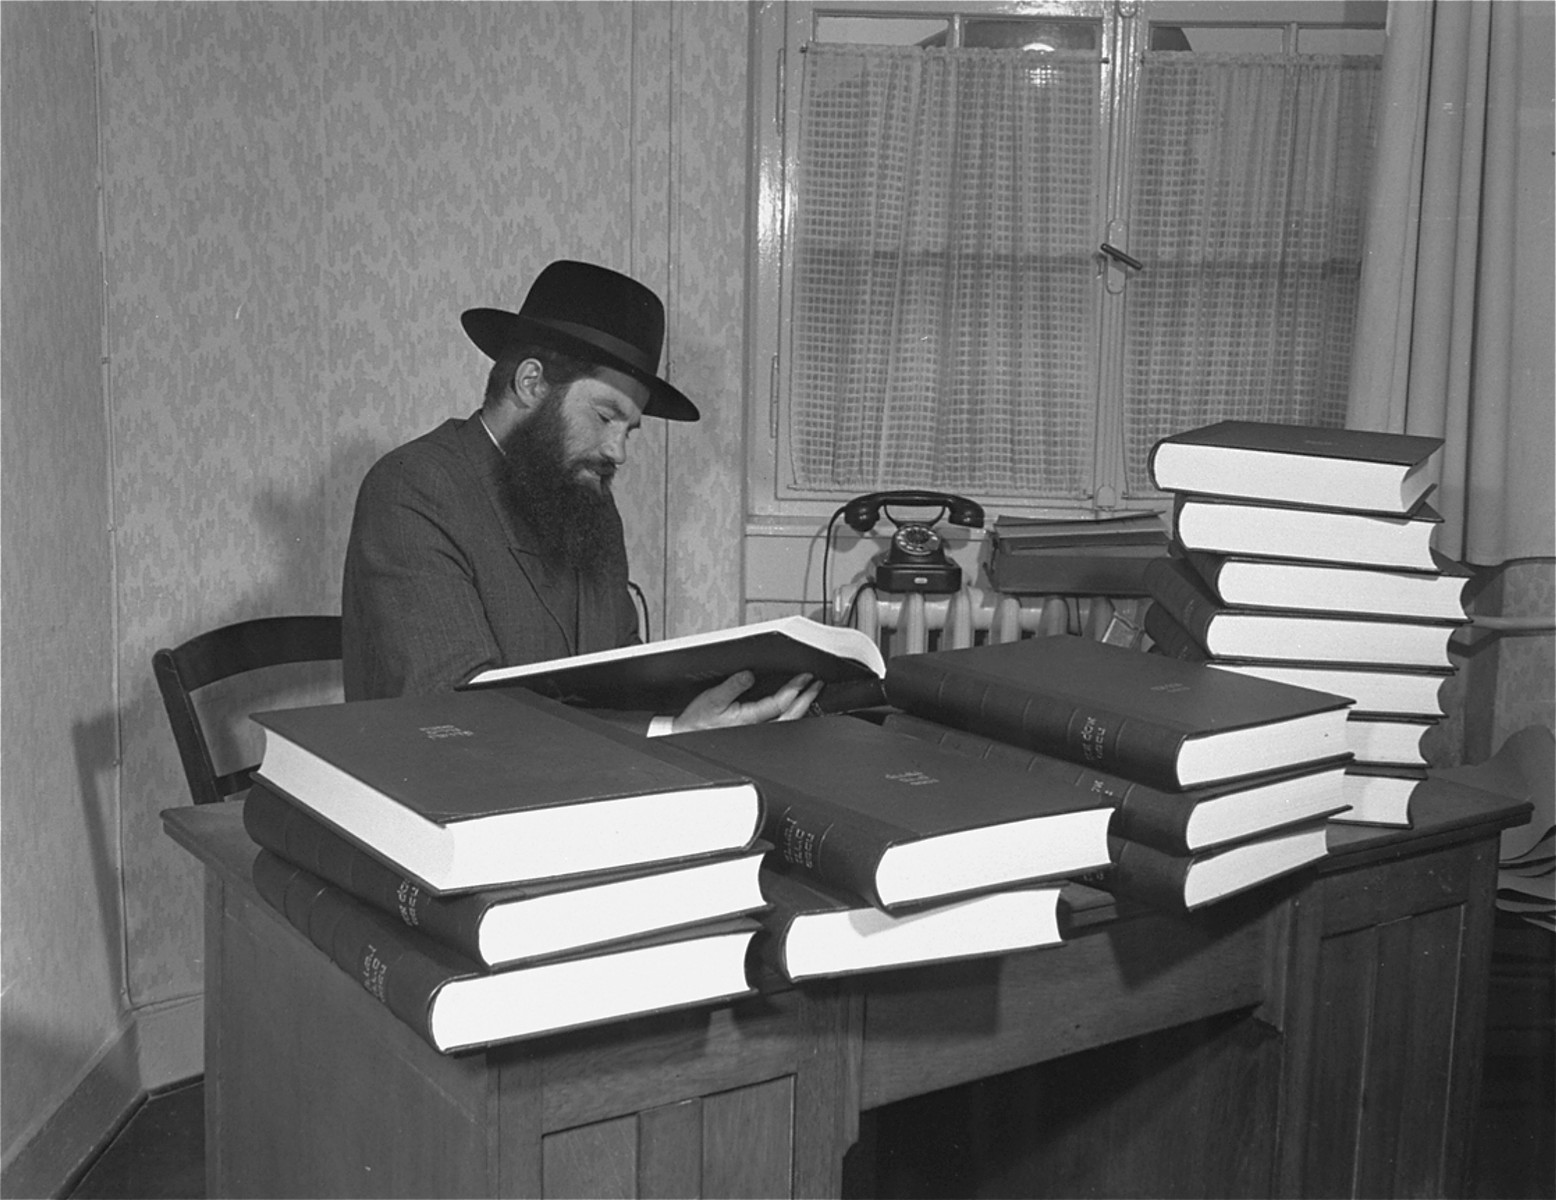 Rabbi Samuel Jakob Rose, Rabbi of the American zone of occupation in Germany, and a survivor of Dachau, examines one of the newly printed volumes of the Talmud.  

This is the first edition of the Talmud to be printed in Germany since Kristallnacht.